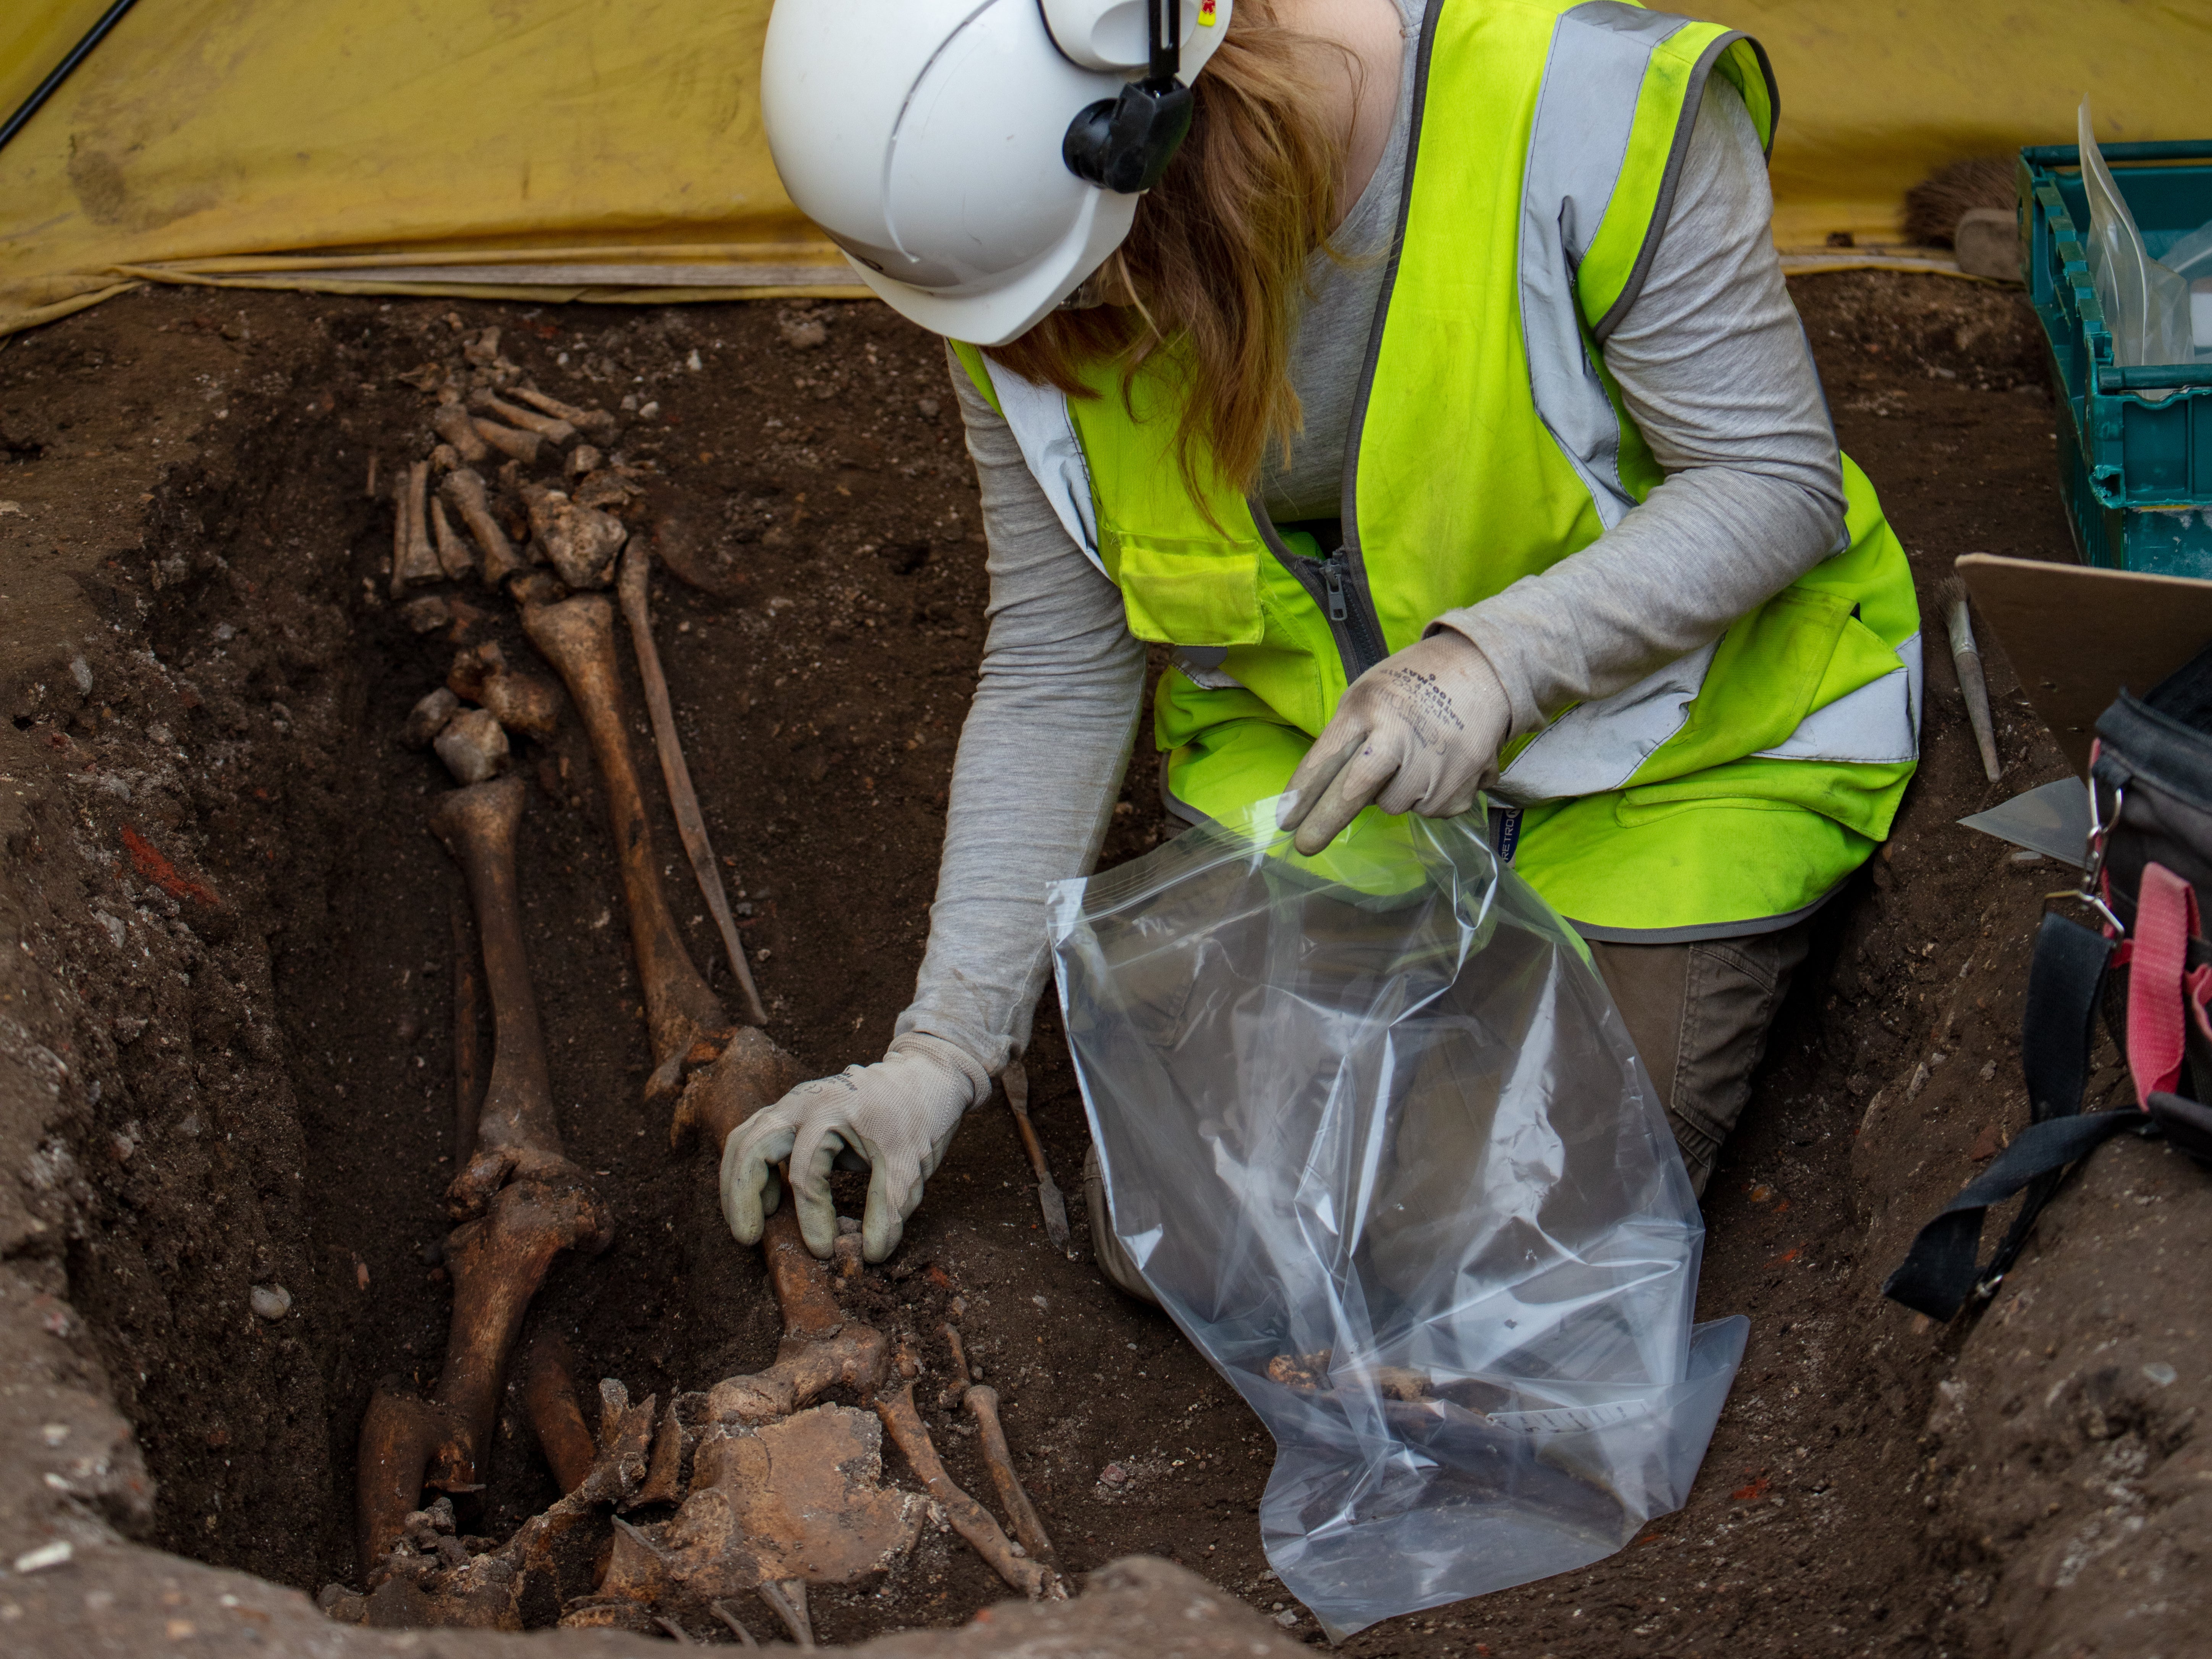 An archaeologist carefully removes the bones from this burial